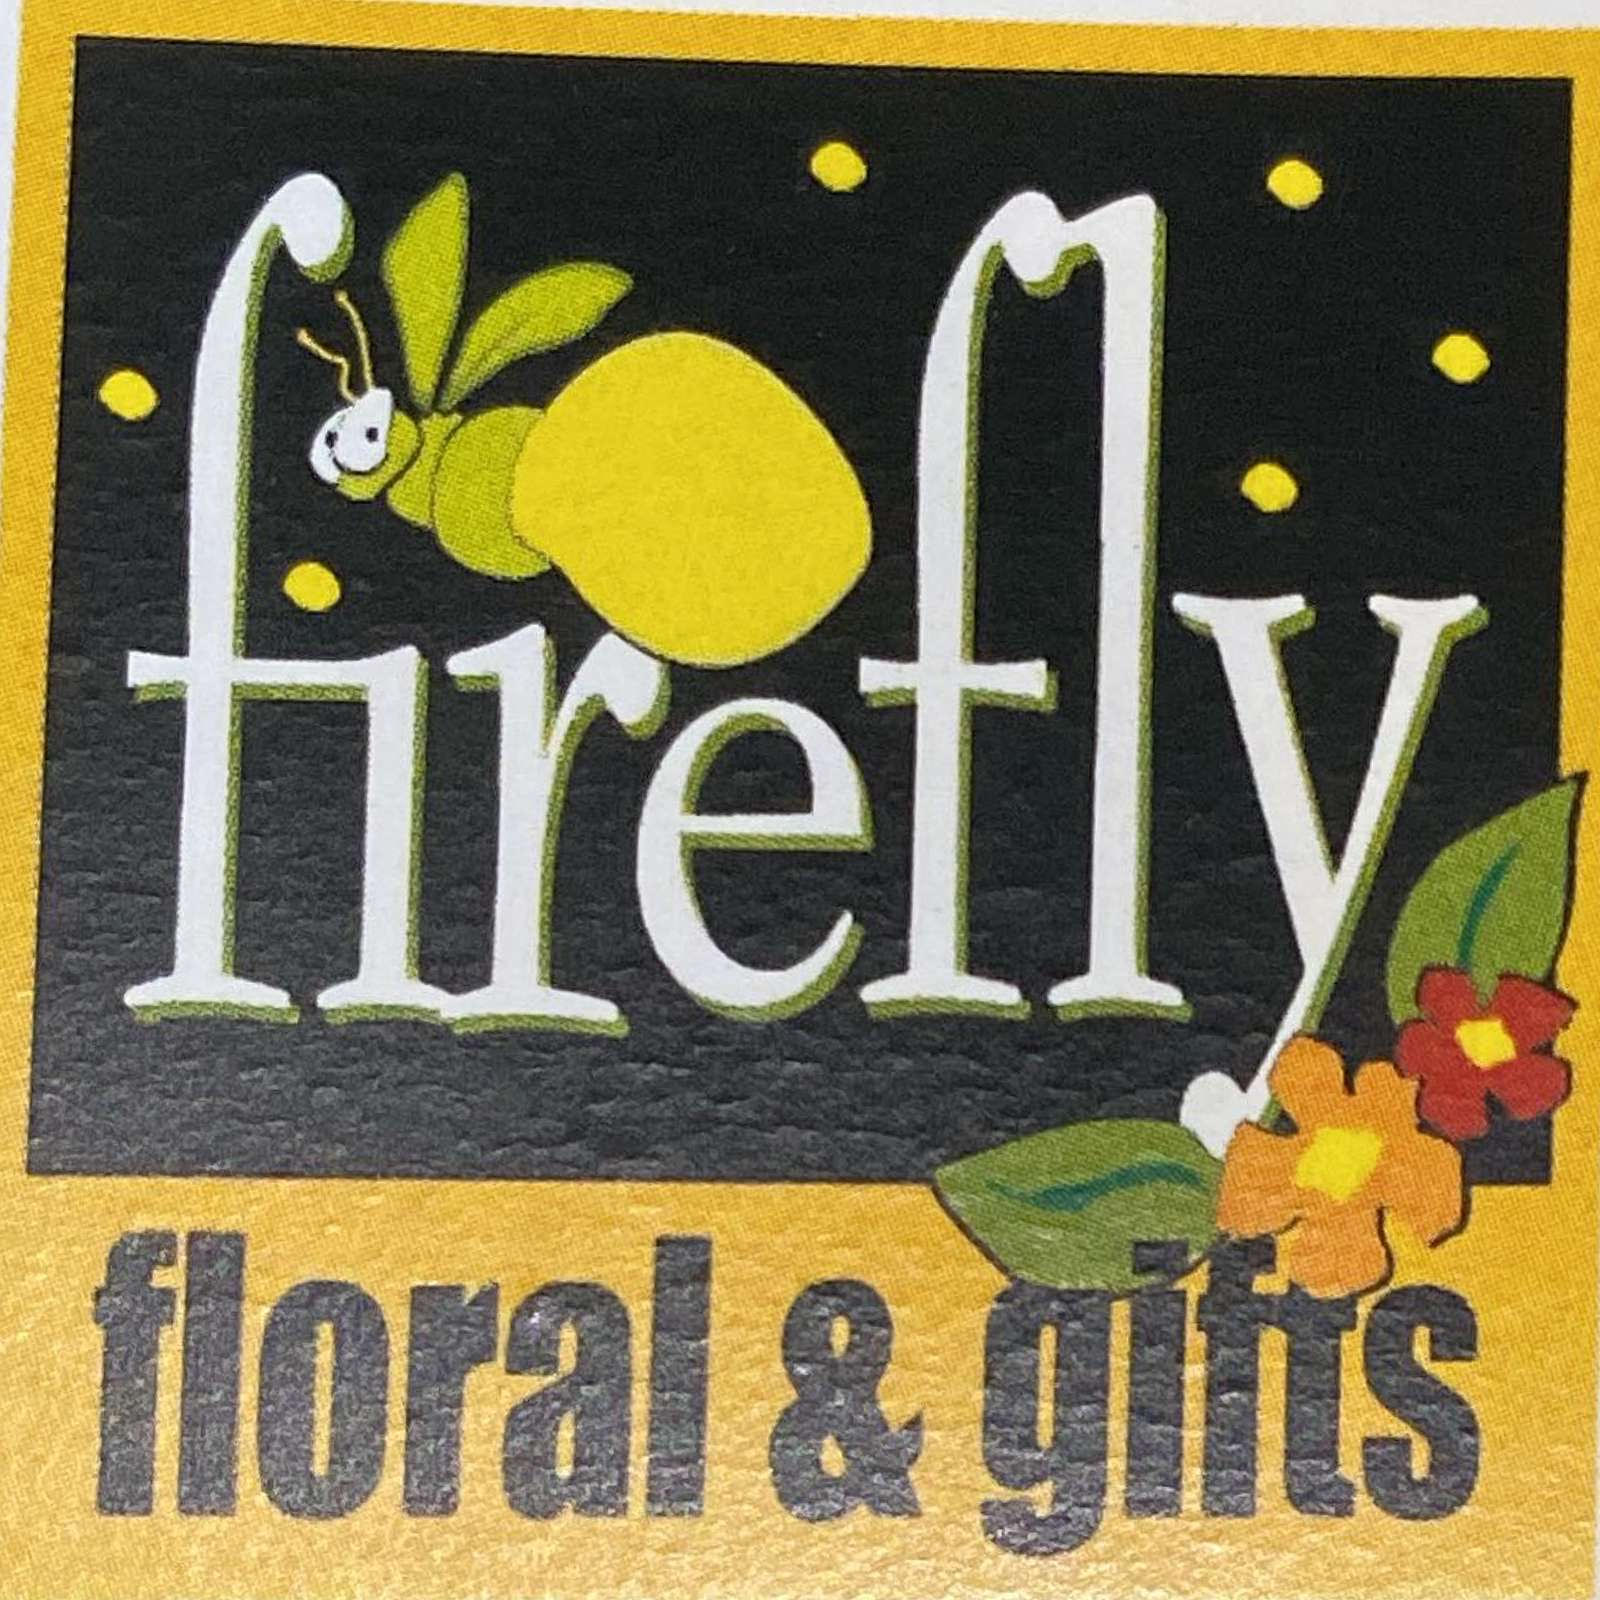 Firefly Floral & Gifts